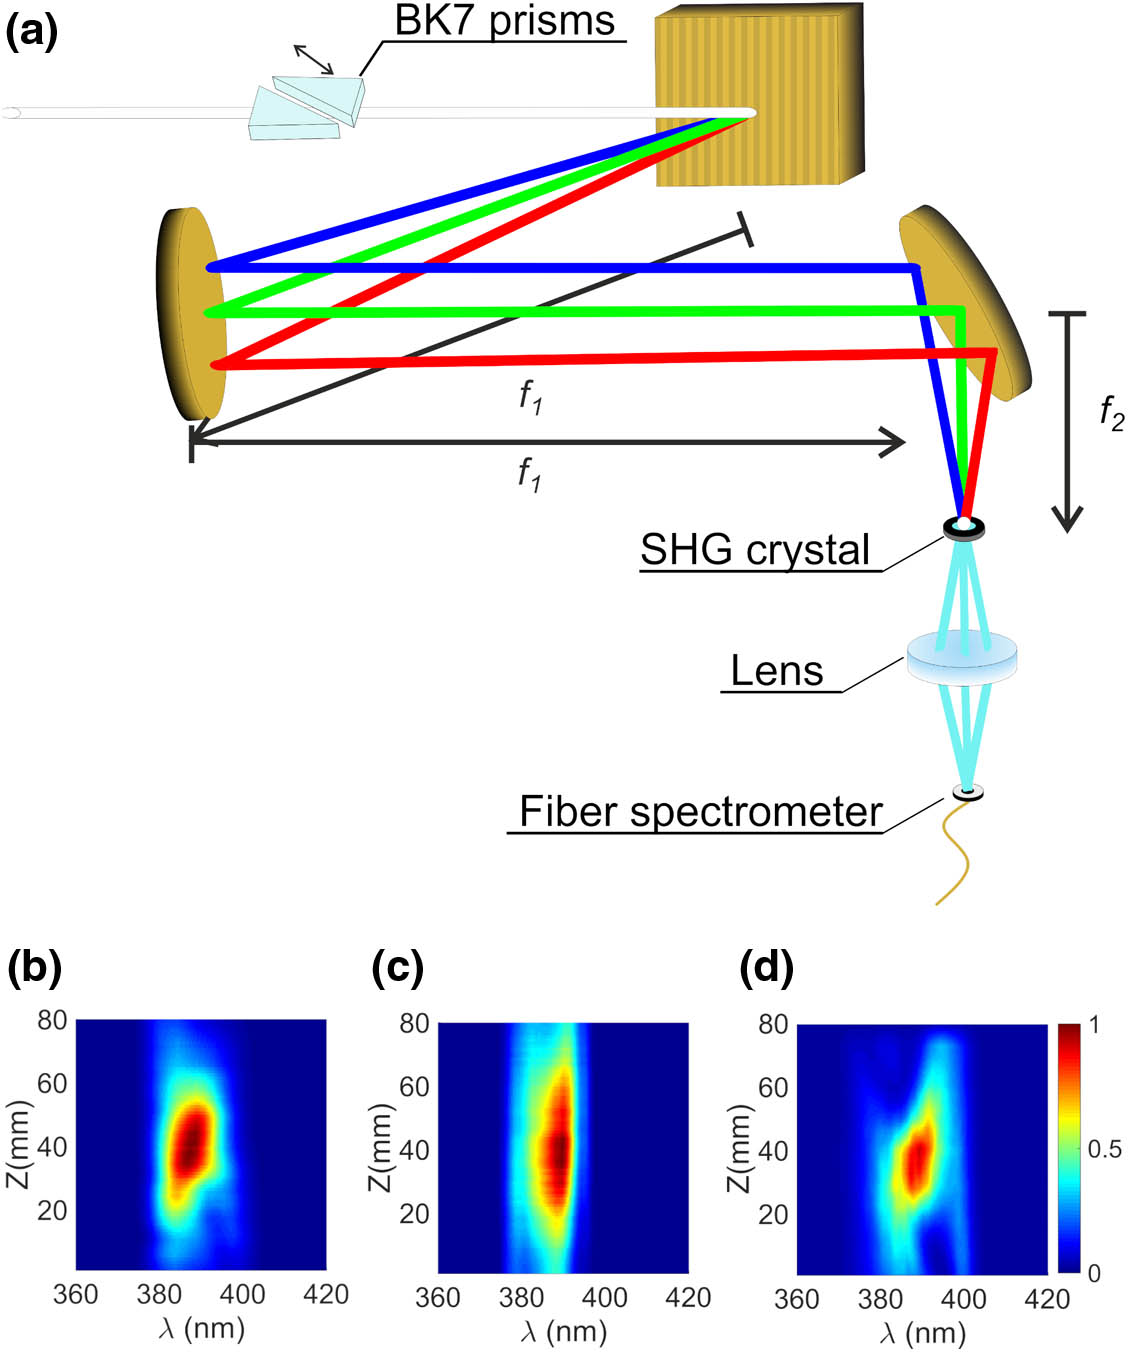 Temporal characterization of the experimental setups. (a) Experimental setup employed for d-scan measurements detailed for the SSTF system. Two BK7 prisms control dispersion added to the pulses by displacing one of them. After propagation through the system a second-harmonic generation (SHG) crystal is placed in the focal spot plane of the system and the SH signal generated is acquired using a collecting lens and a fiber spectrometer. (b) D-scan trace measured for the COS. SH signal is represented as a function of the position of the movable BK7 prism. (c) D-scan trace measured for the SSTF system. (d) D-scan trace measured for the IOS.